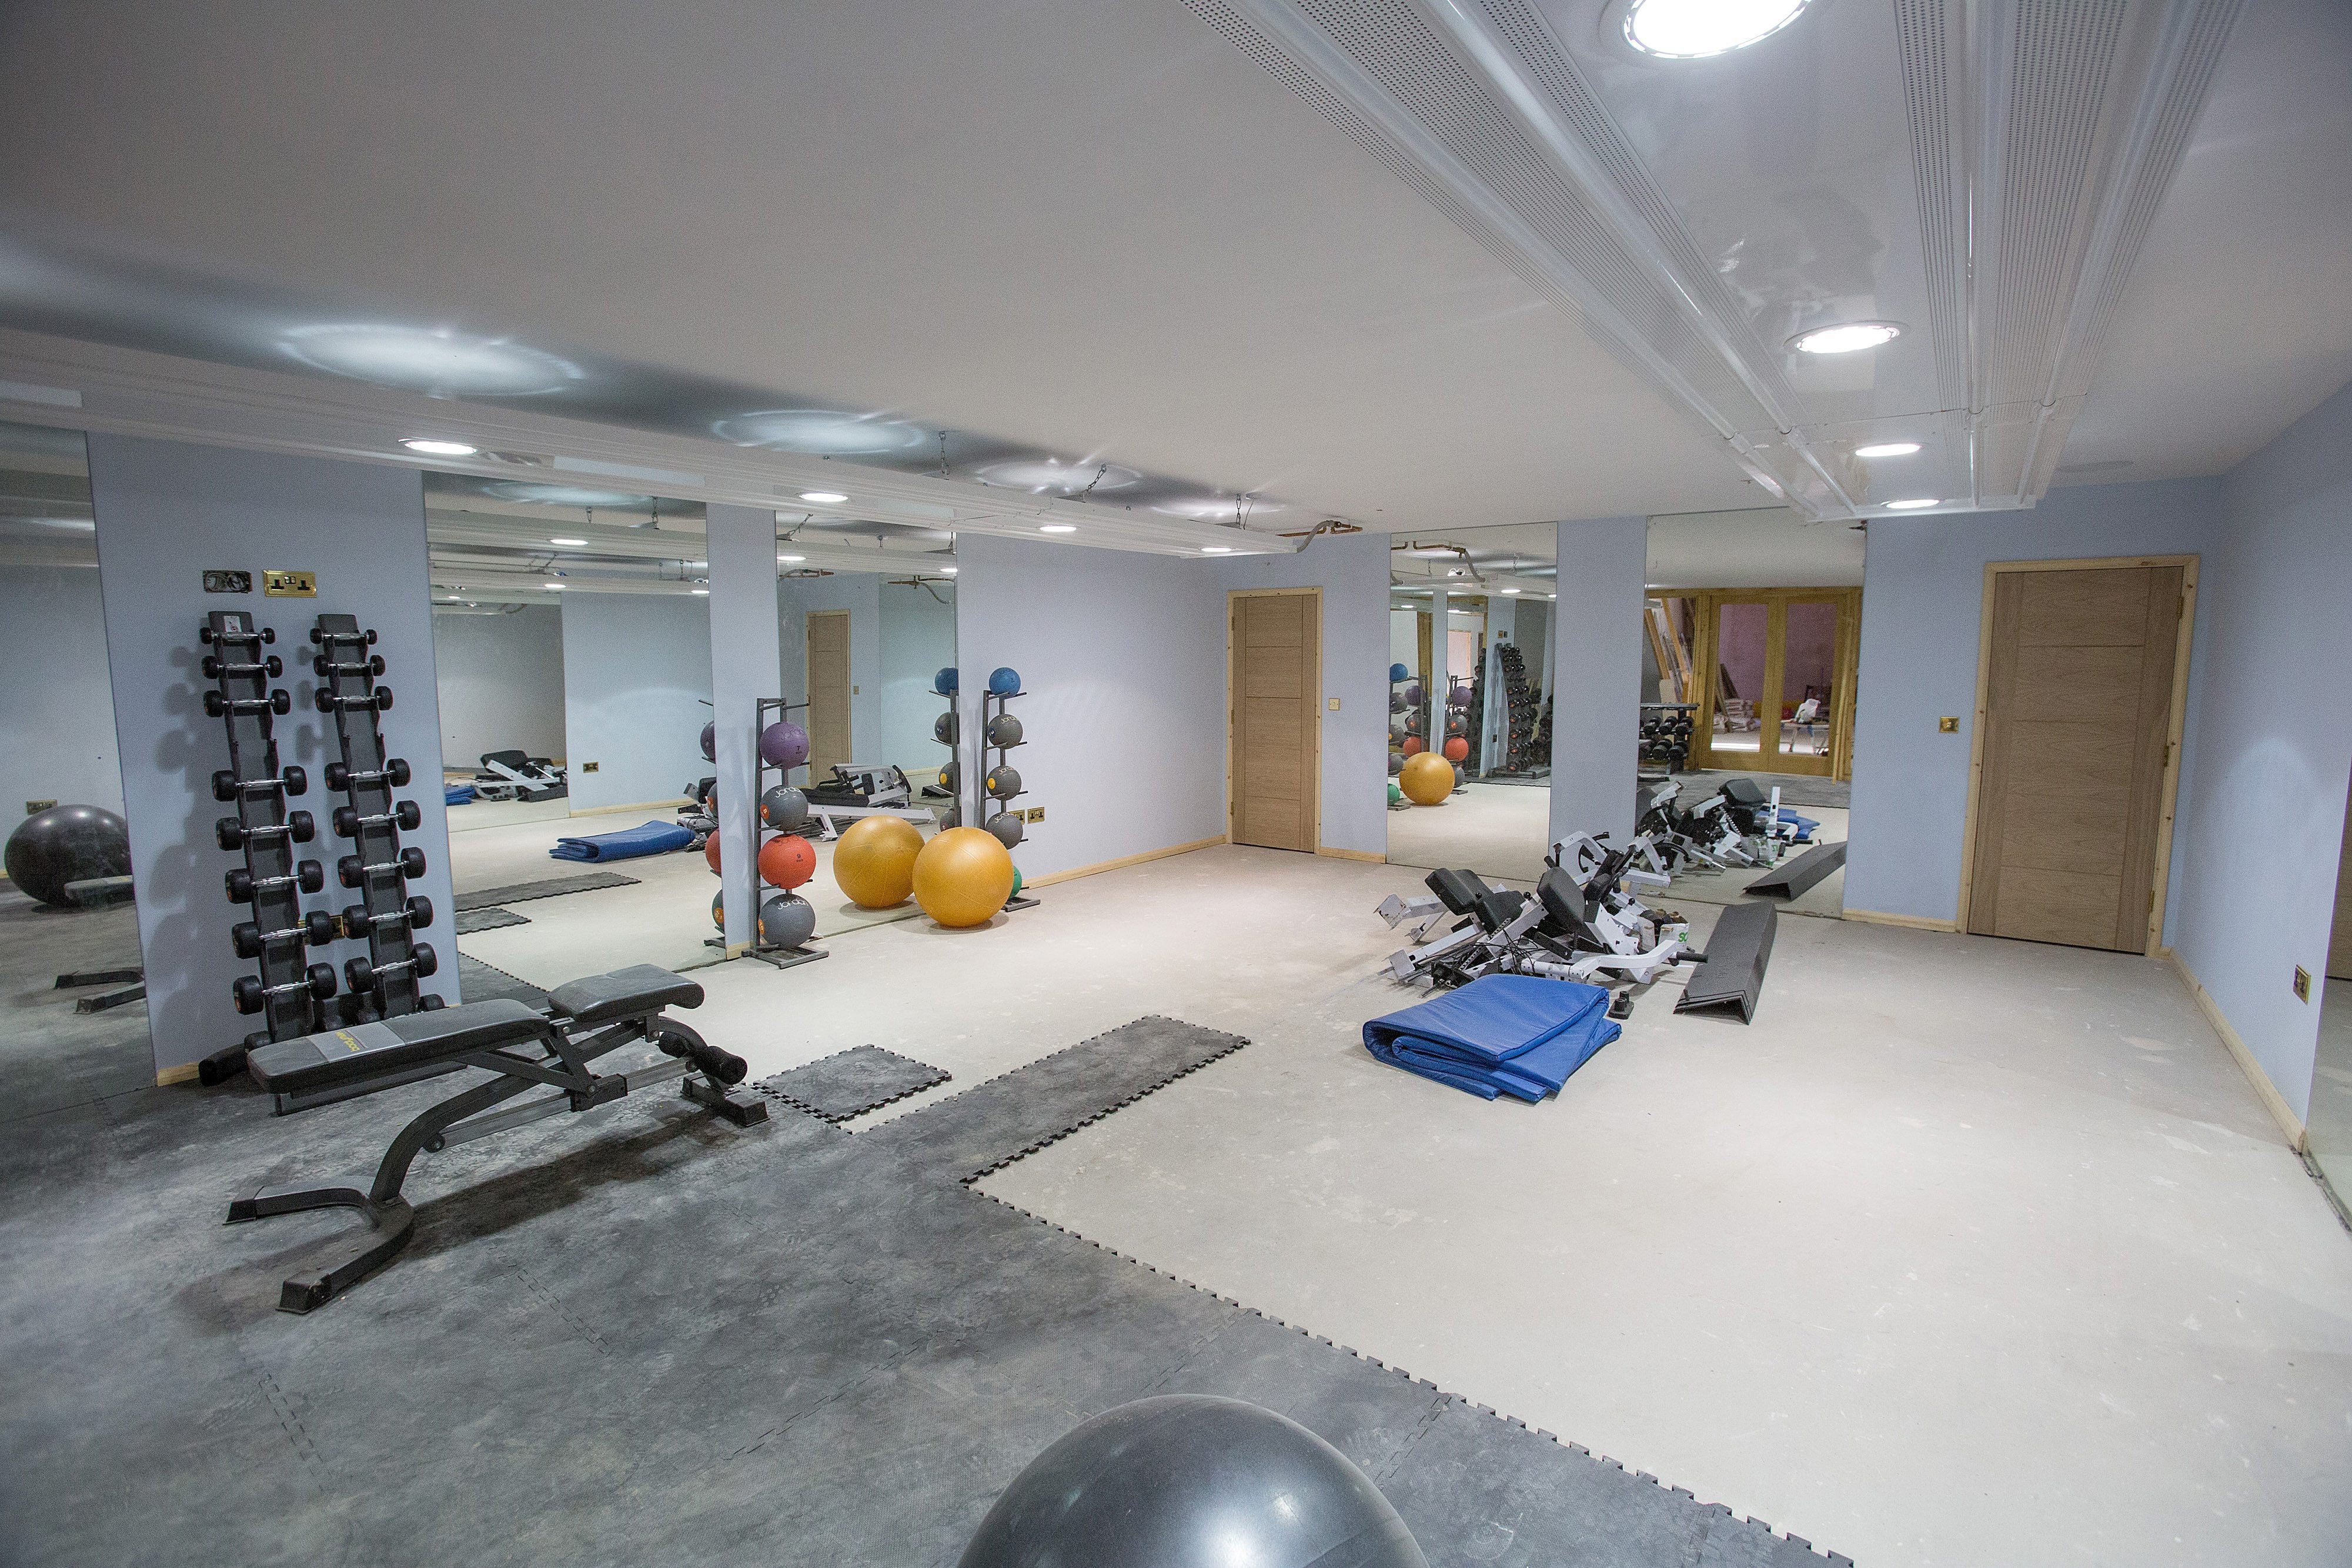 Inside the gym which forms part of Wildin’s plush extension